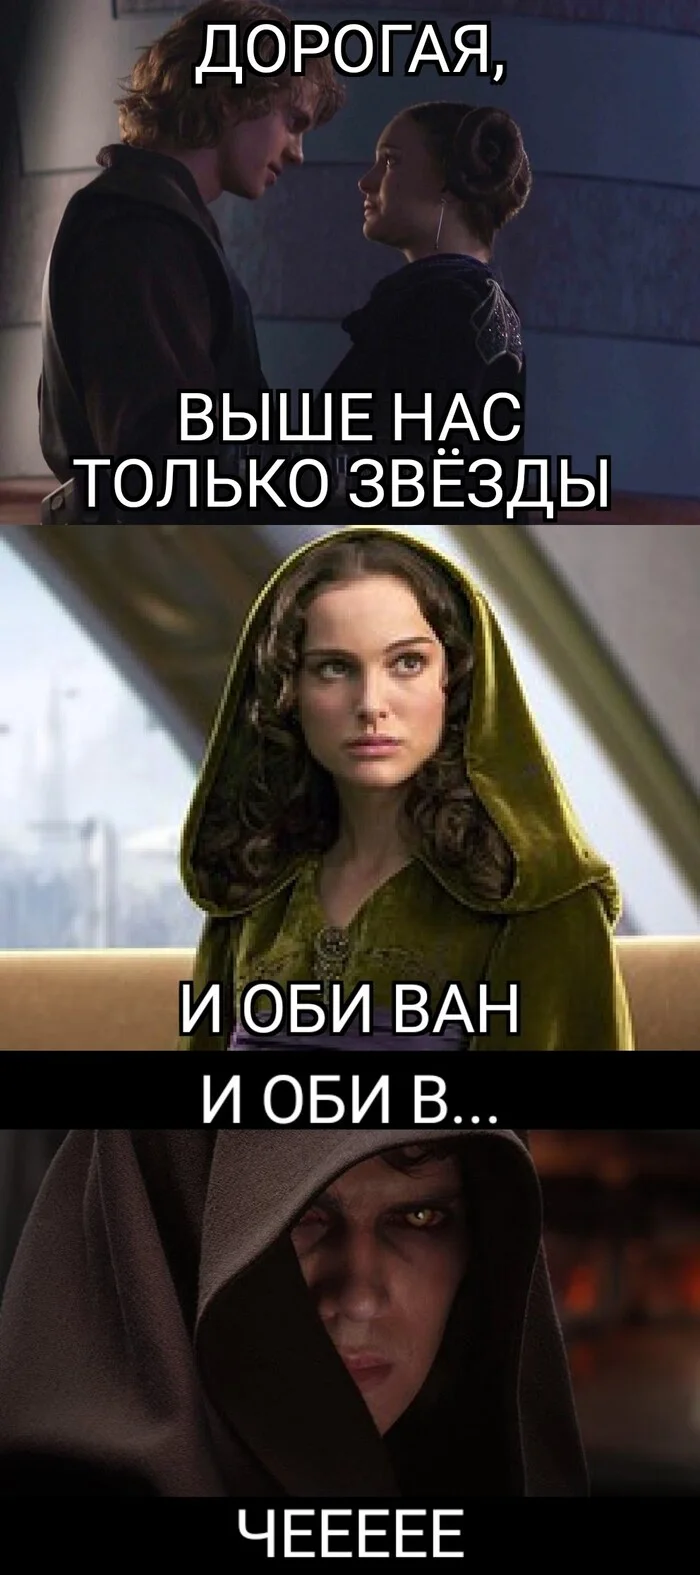 Above us... - My, Star Wars, Padme Amidala, Anakin Skywalker, Longpost, Picture with text